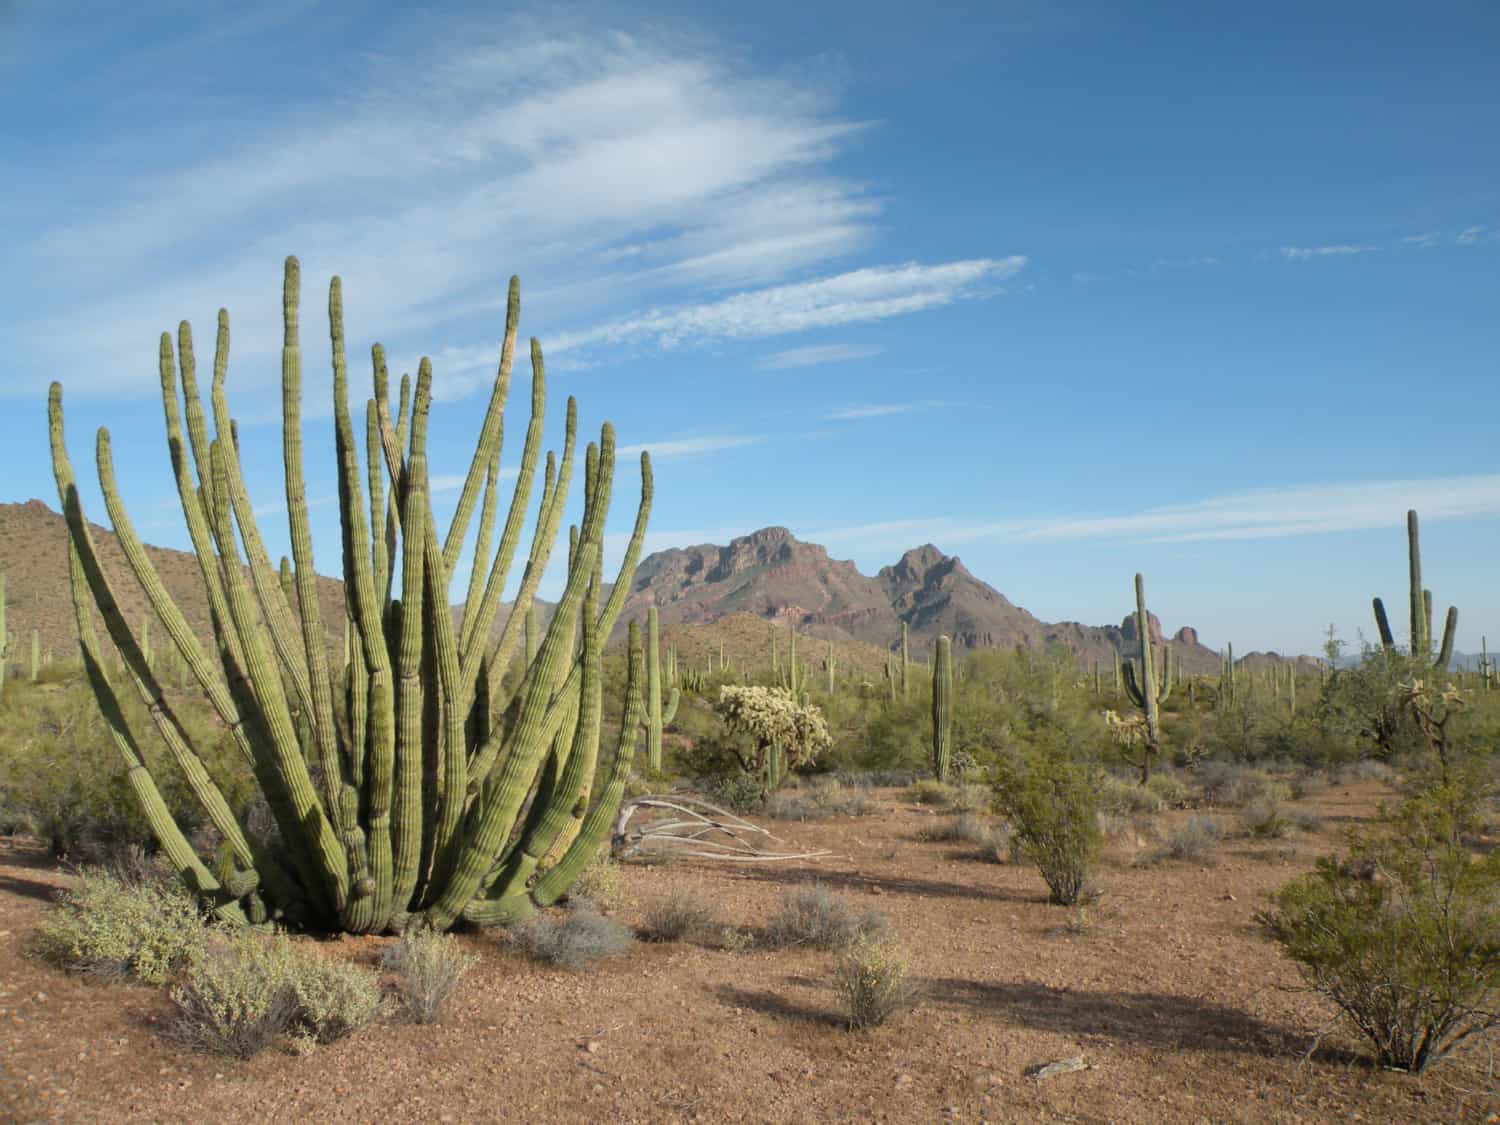 Landscape at pet friendly Organ Pipe Cactus National Monument in Arizona